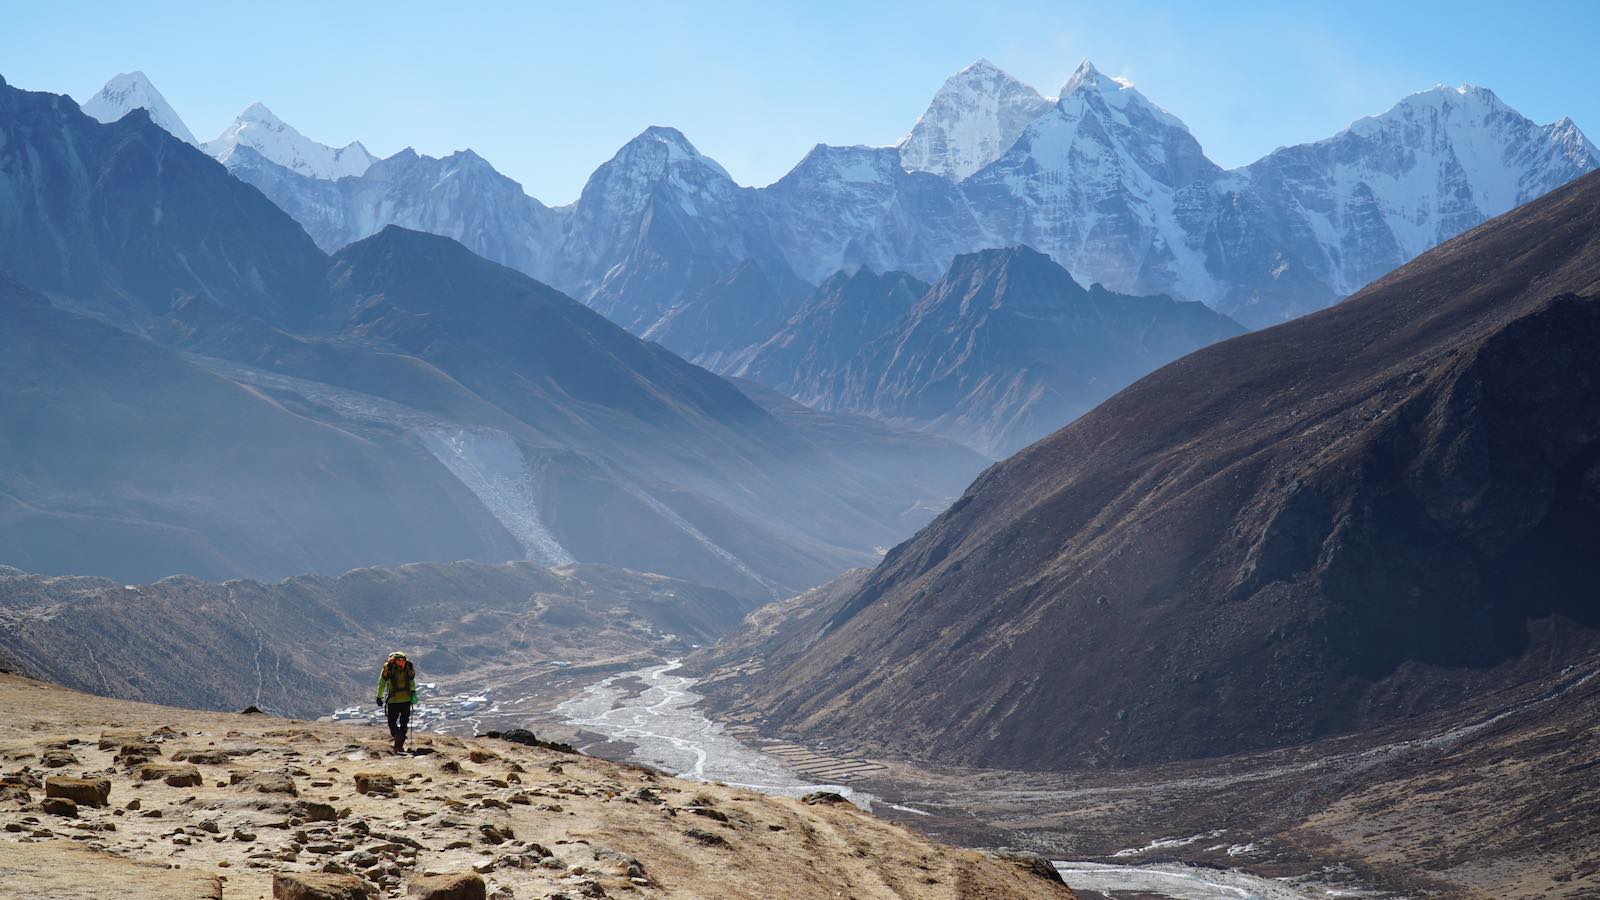 The first half of the trek was through an massive valley towards a glacial river crossing